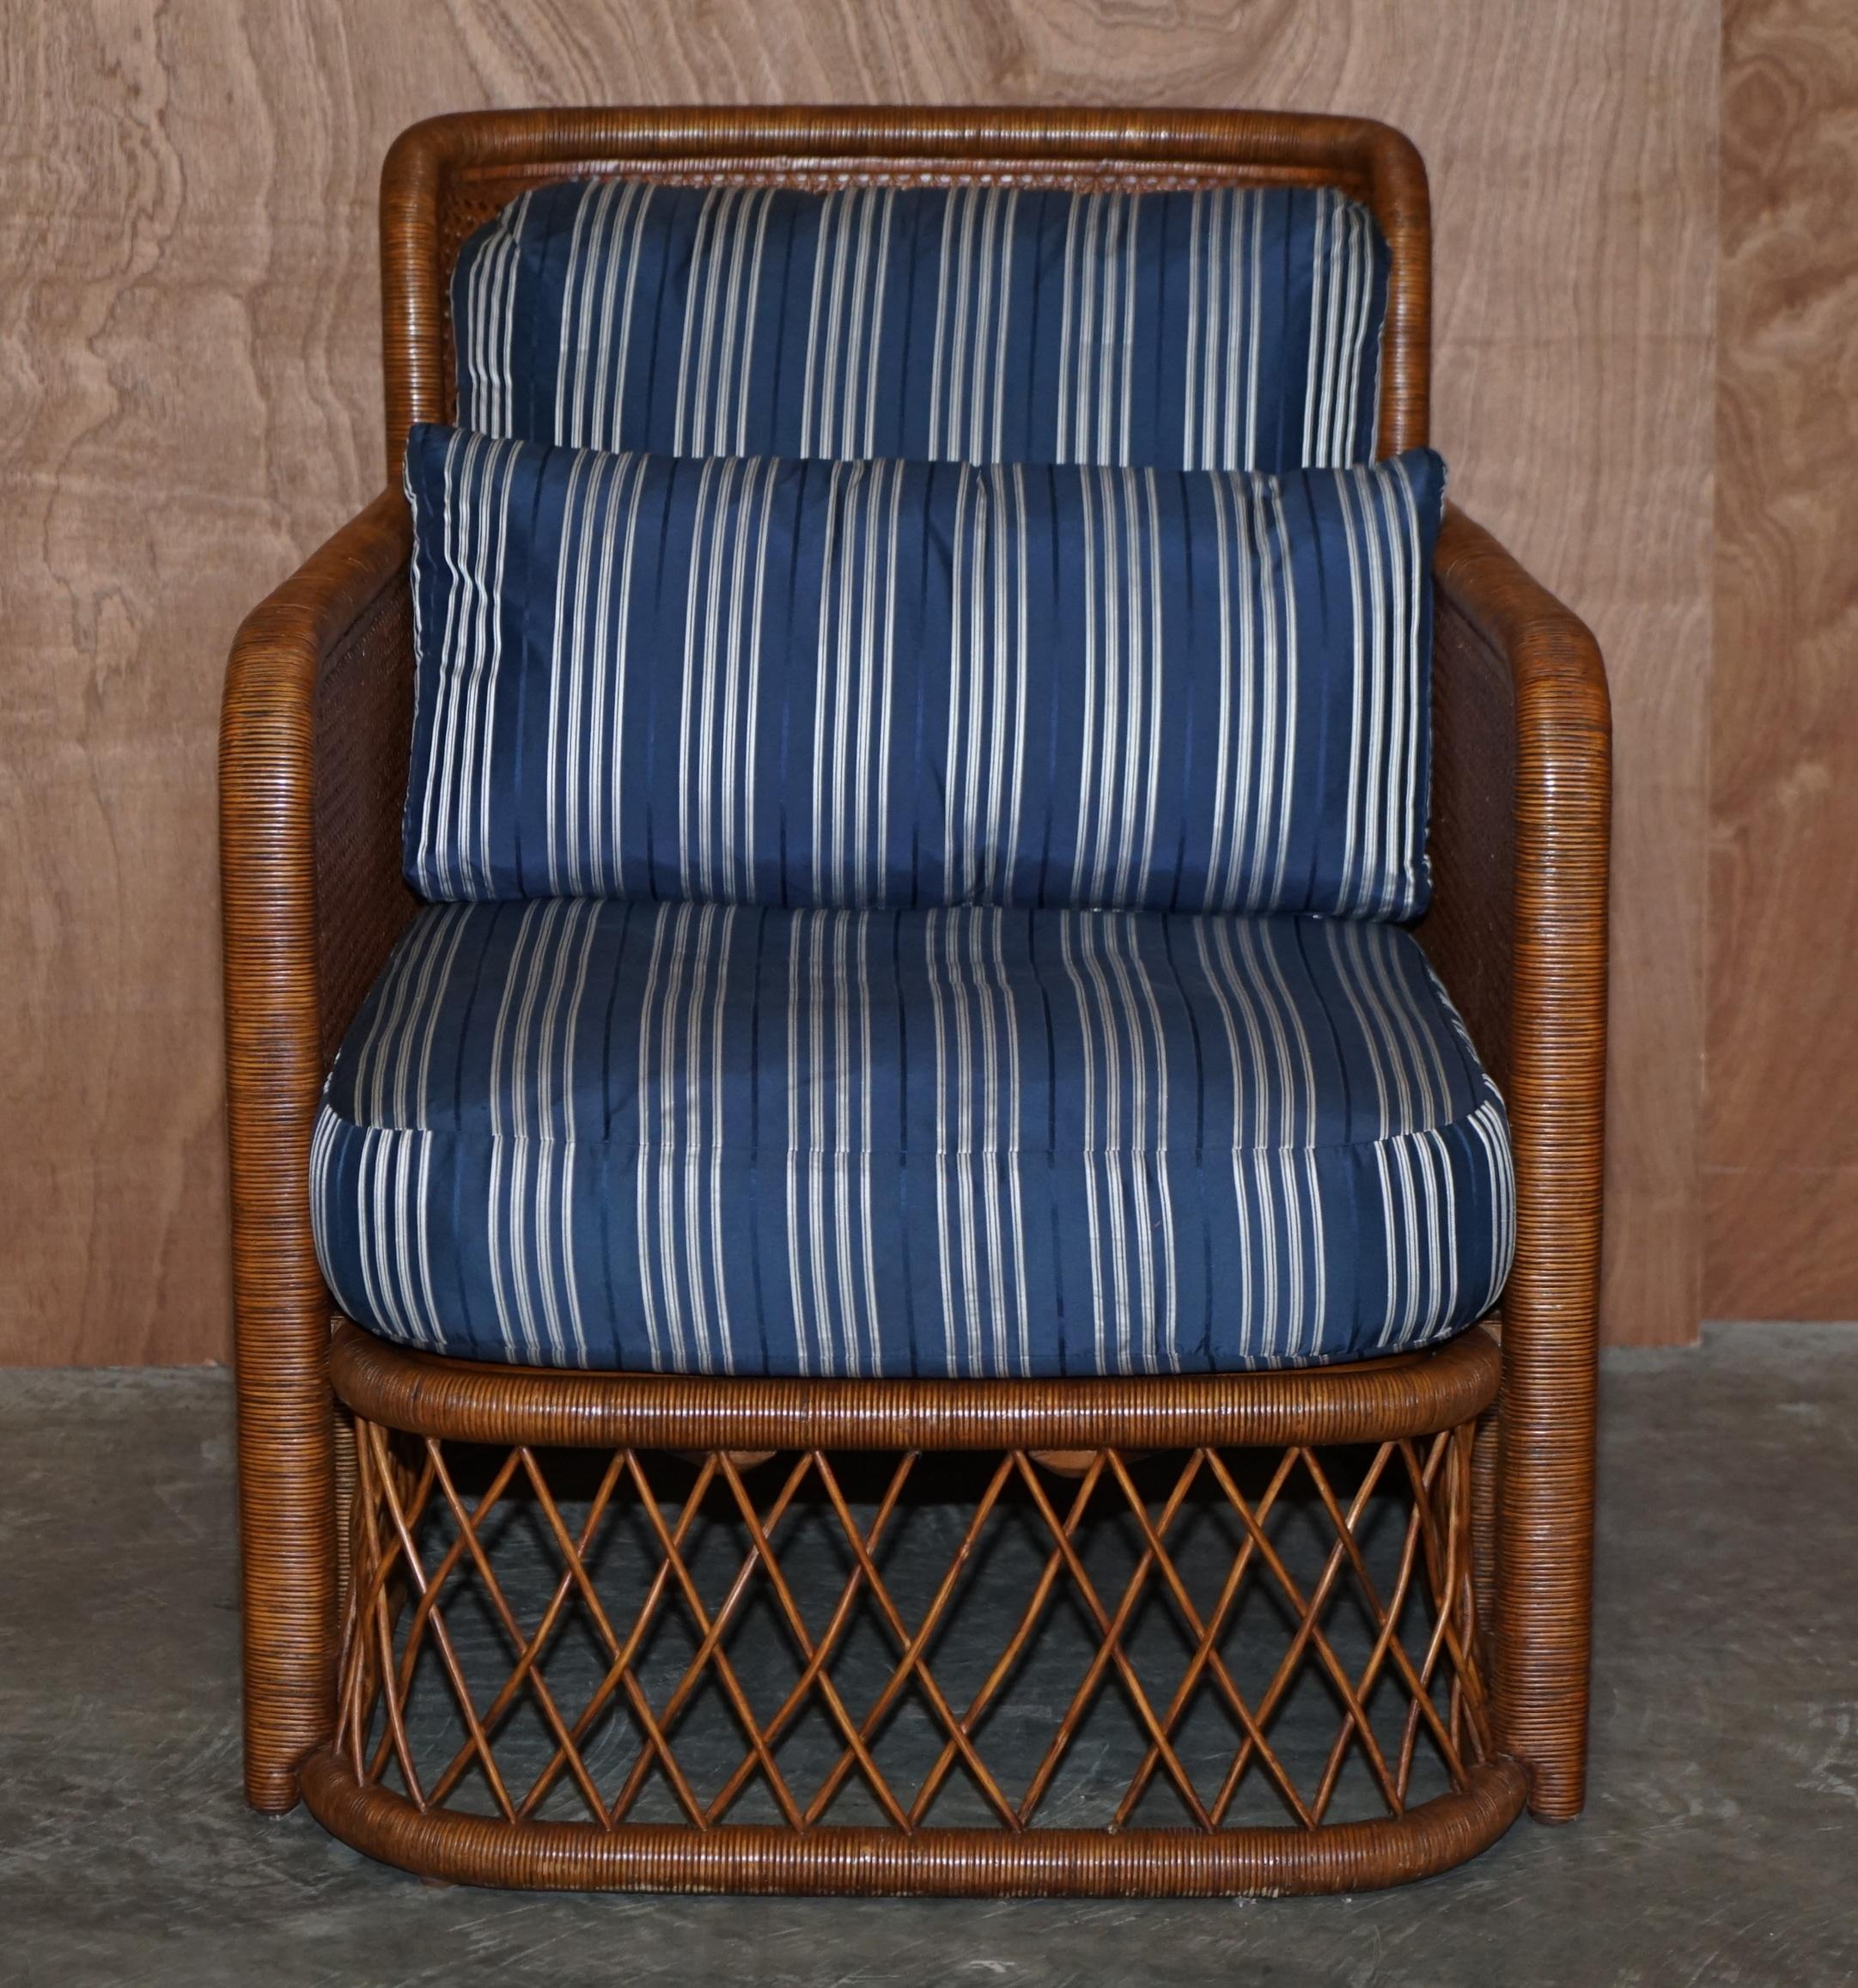 We are delighted to offer for sale this exquisite RRP £6,800 Ralph Lauren Speciality 867 Madison Ave New York stamped berger armchair

A very good looking and well made piece, I don’t think its ever been used as it looks to be in pretty much new